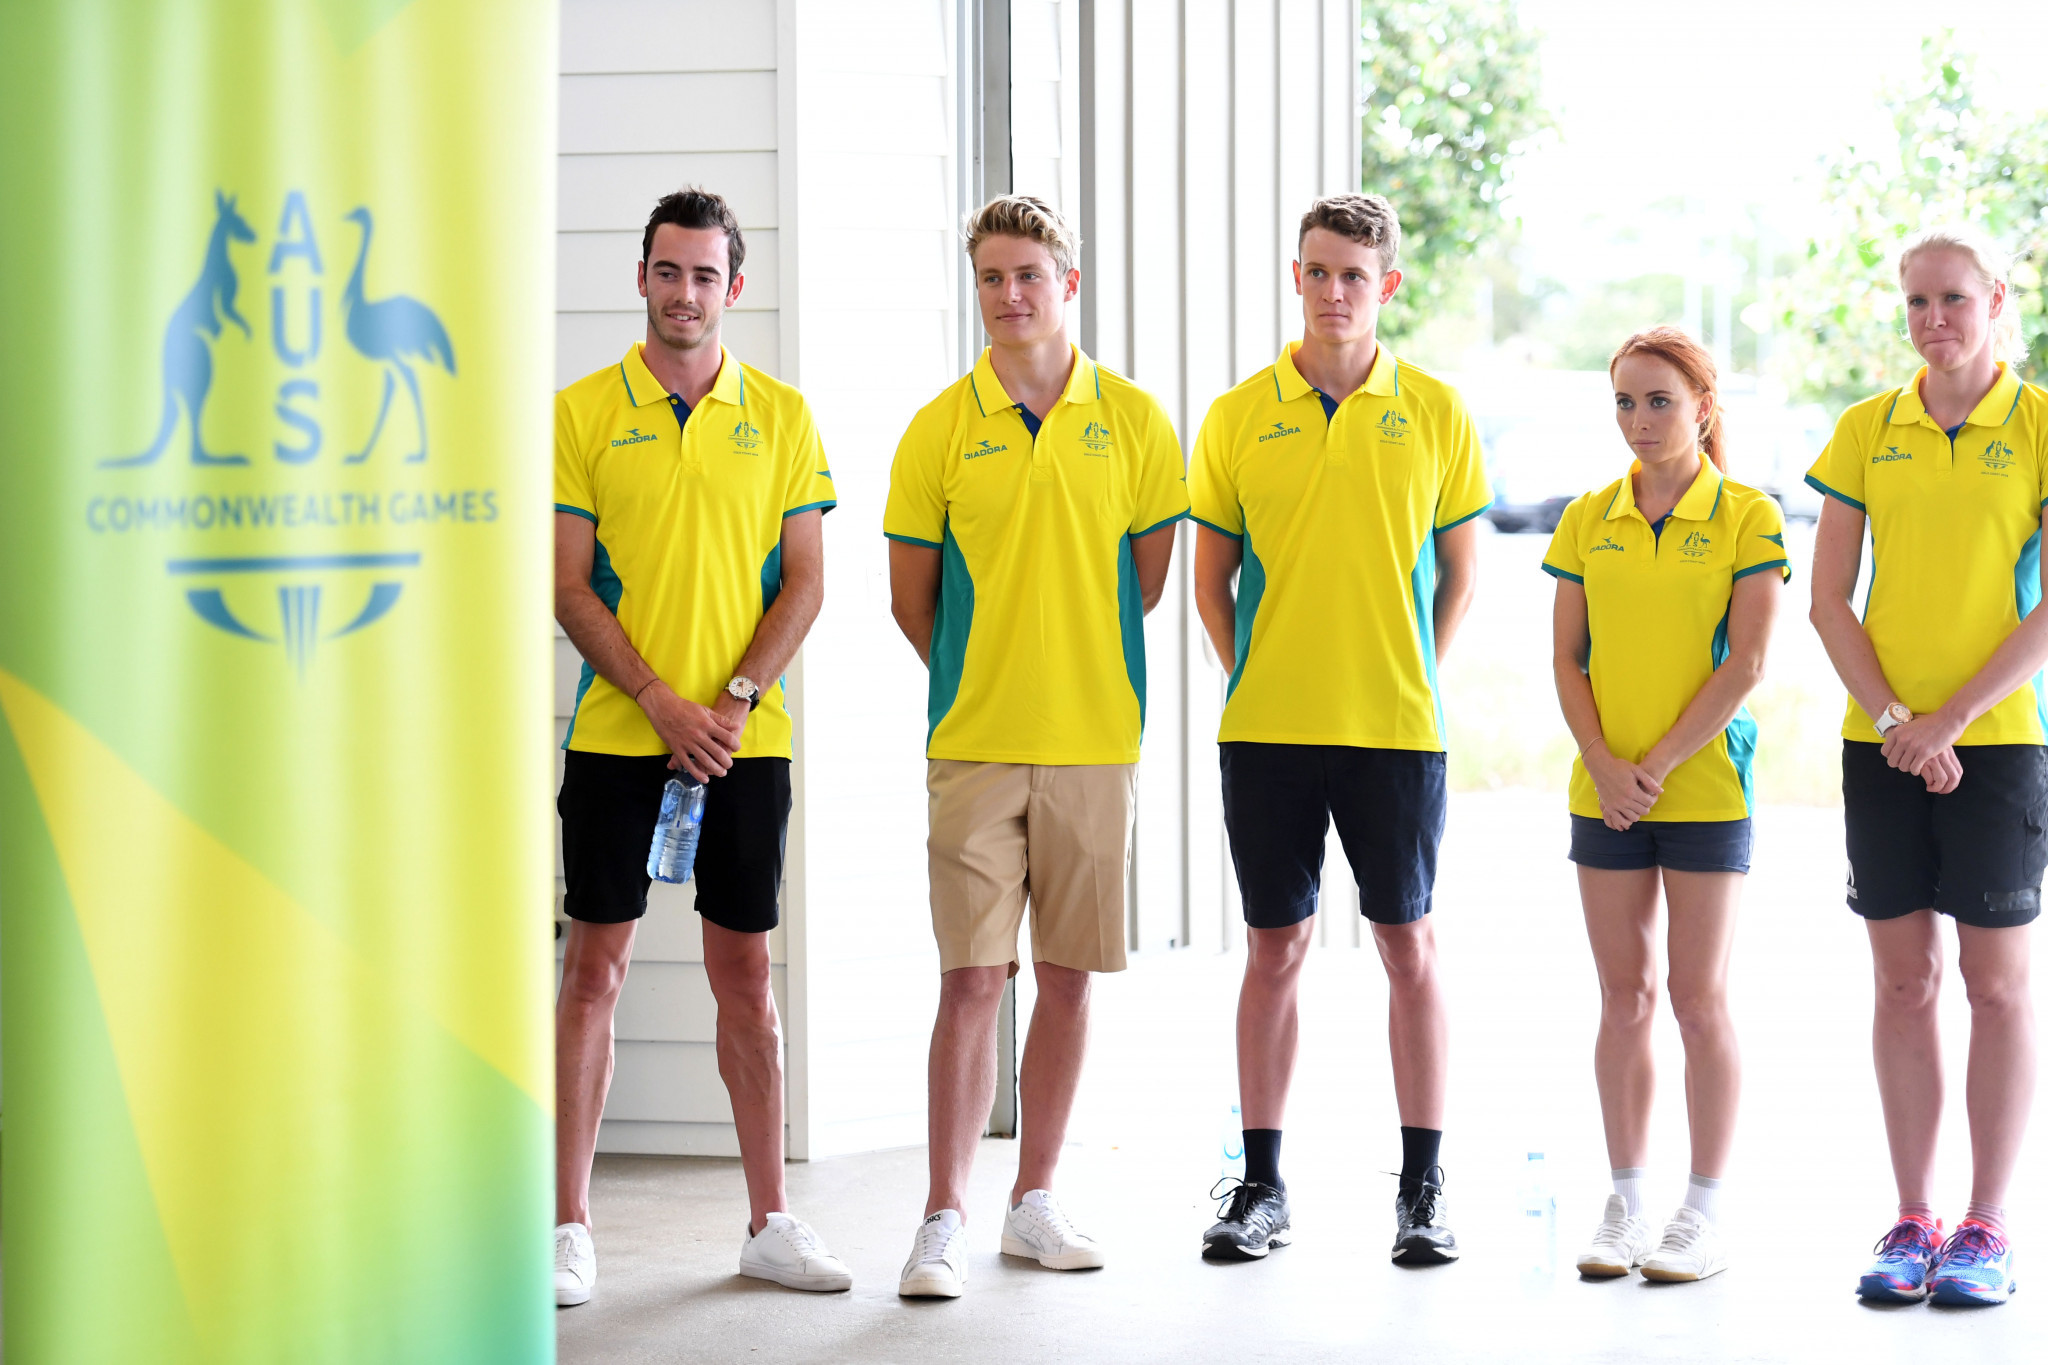 Members of the Australian triathlon team for the Gold Coast Commonwealth Games, who were named today at Broadwater Parklands in Southport ©Commonwealth Games Australia